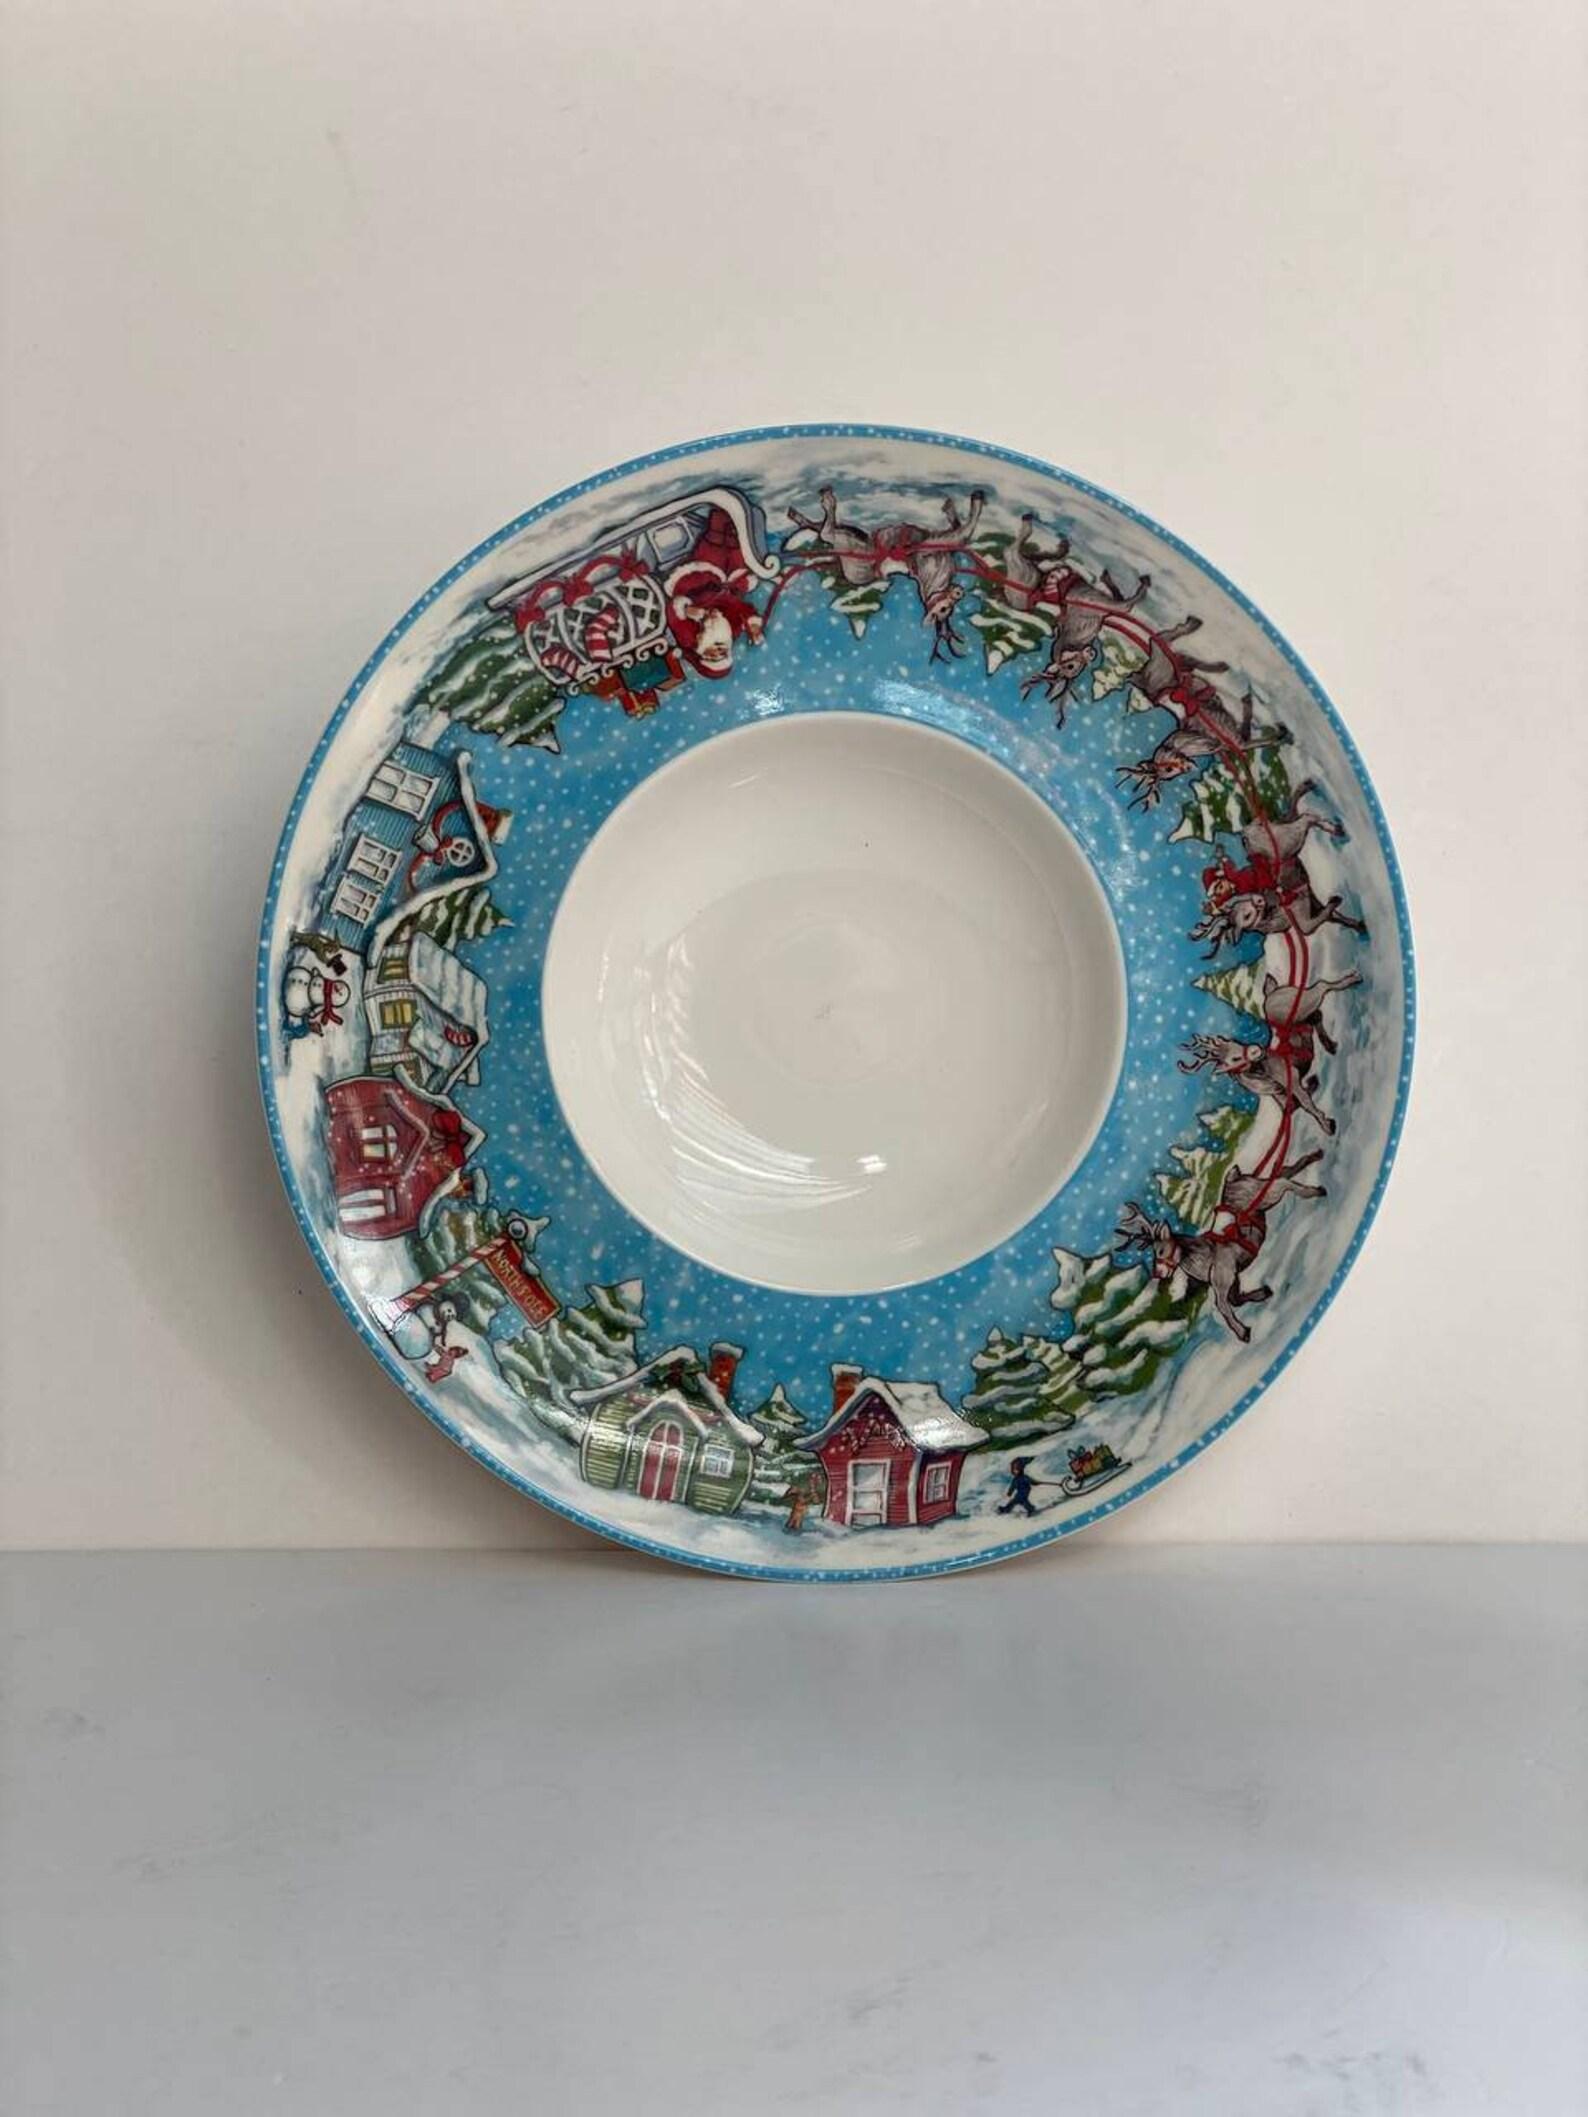 Beautiful Christmas Plate From Villeroy & Boch Porcelail Plate In Excellent Condition For Sale In Bastogne, BE